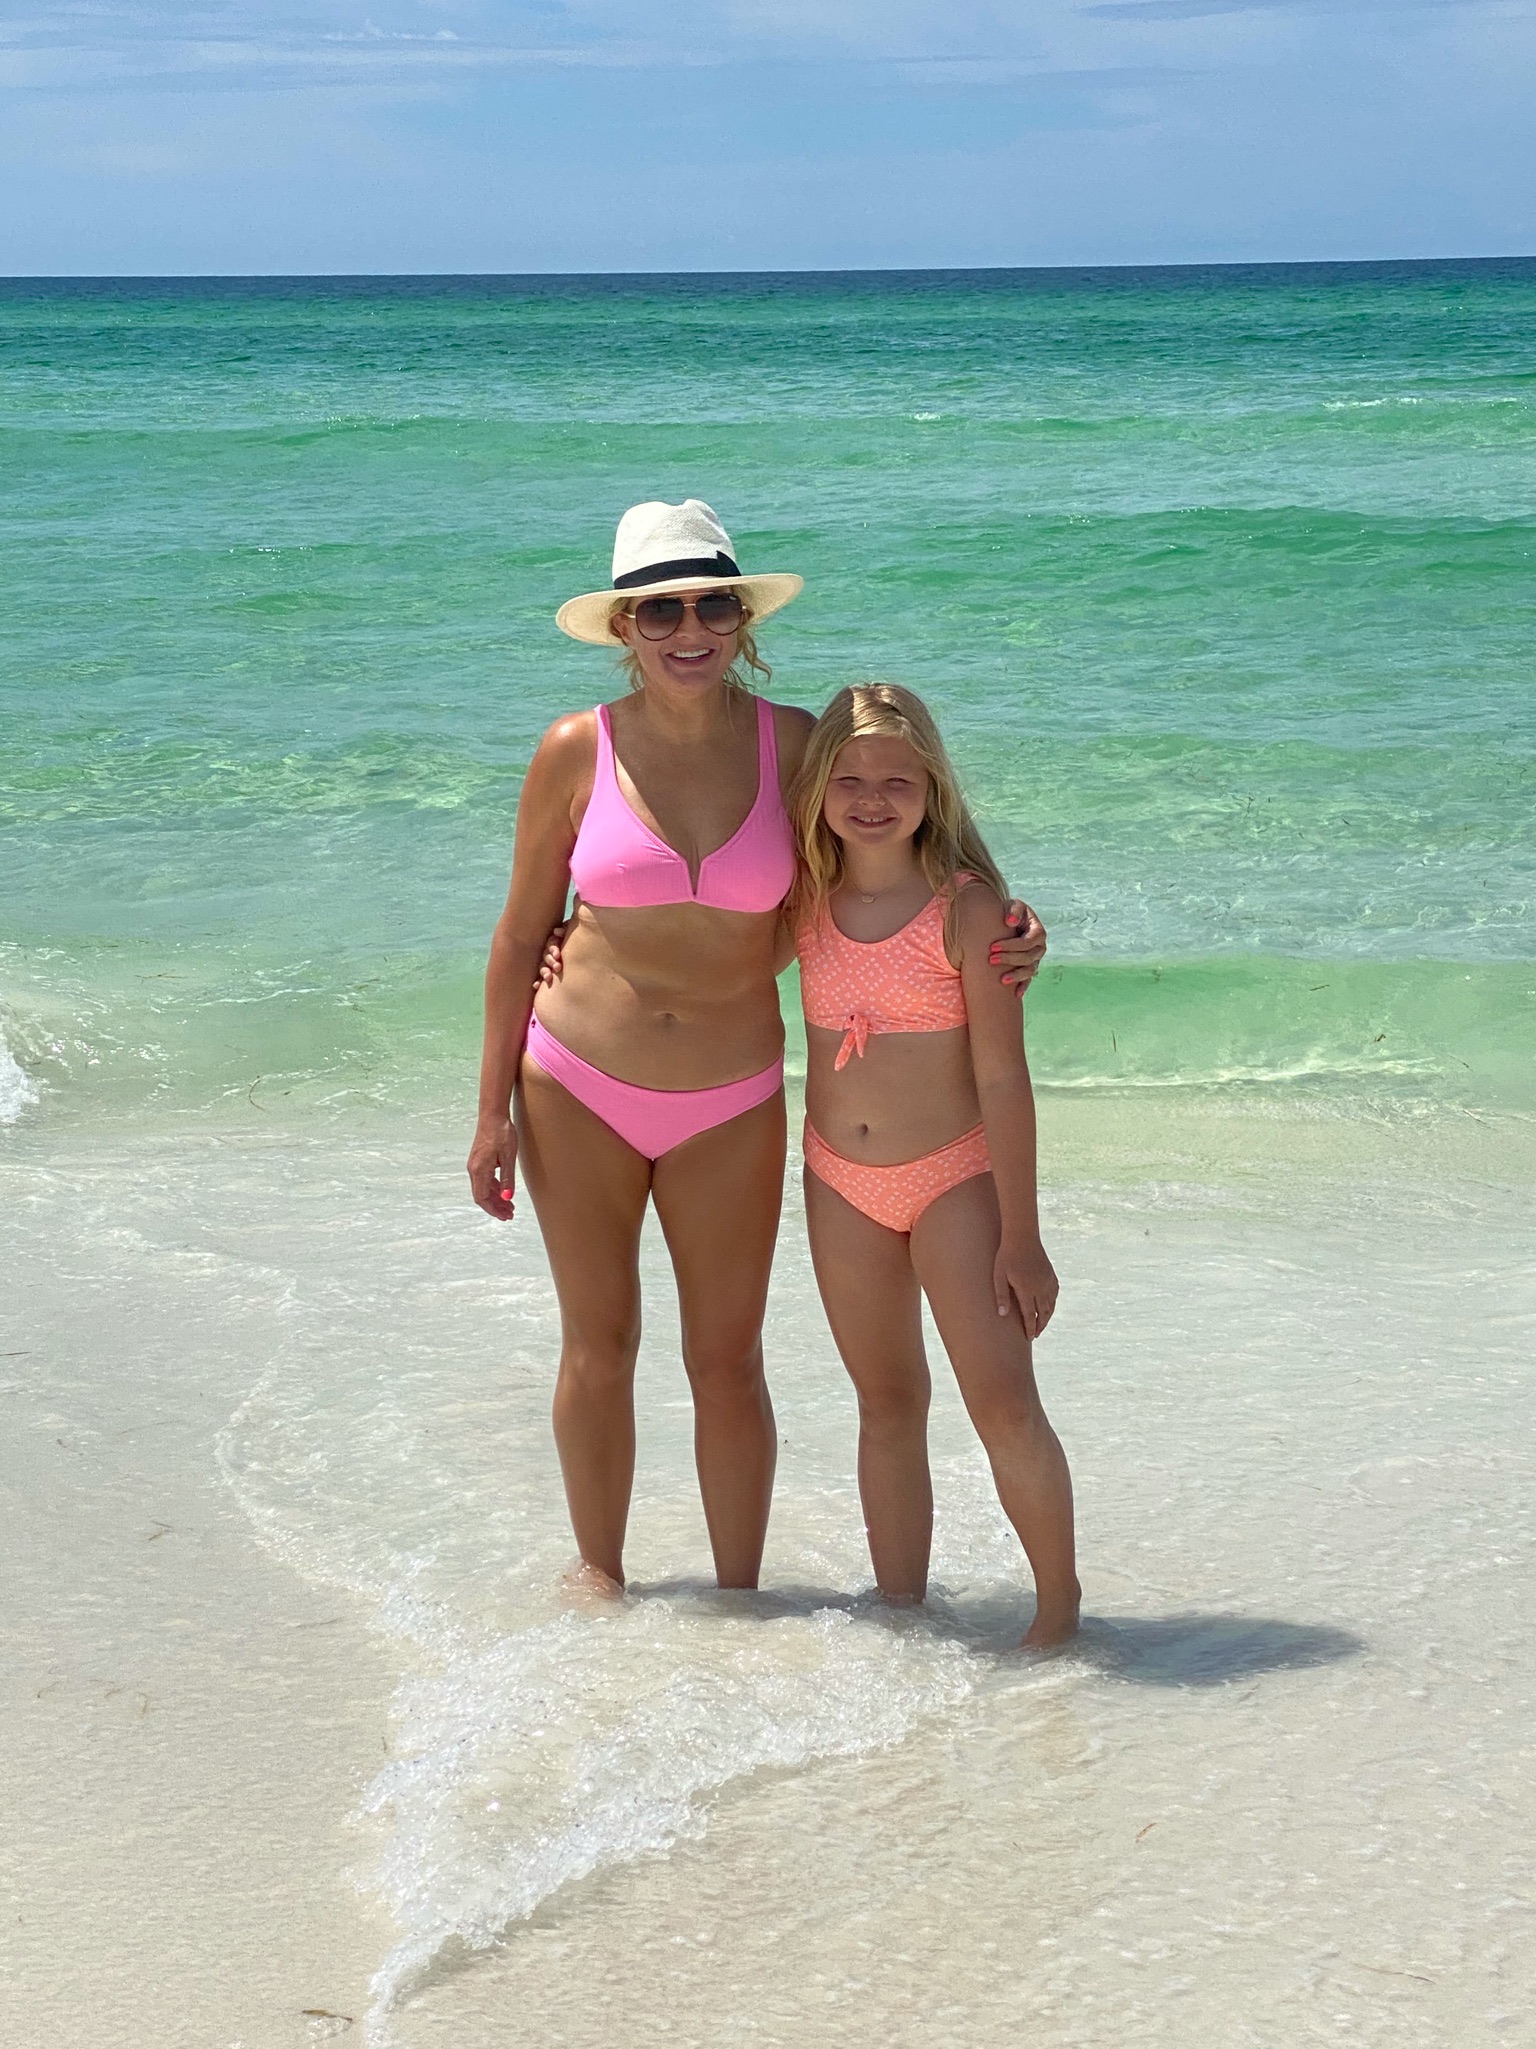 Seaside Florida by popular Houston travel blog, The House of Fancy: image of a mom and her young daughter standing together in the ocean and wearing a neon pink bikini, white straw fedora, and orange two piece swimsuit. 